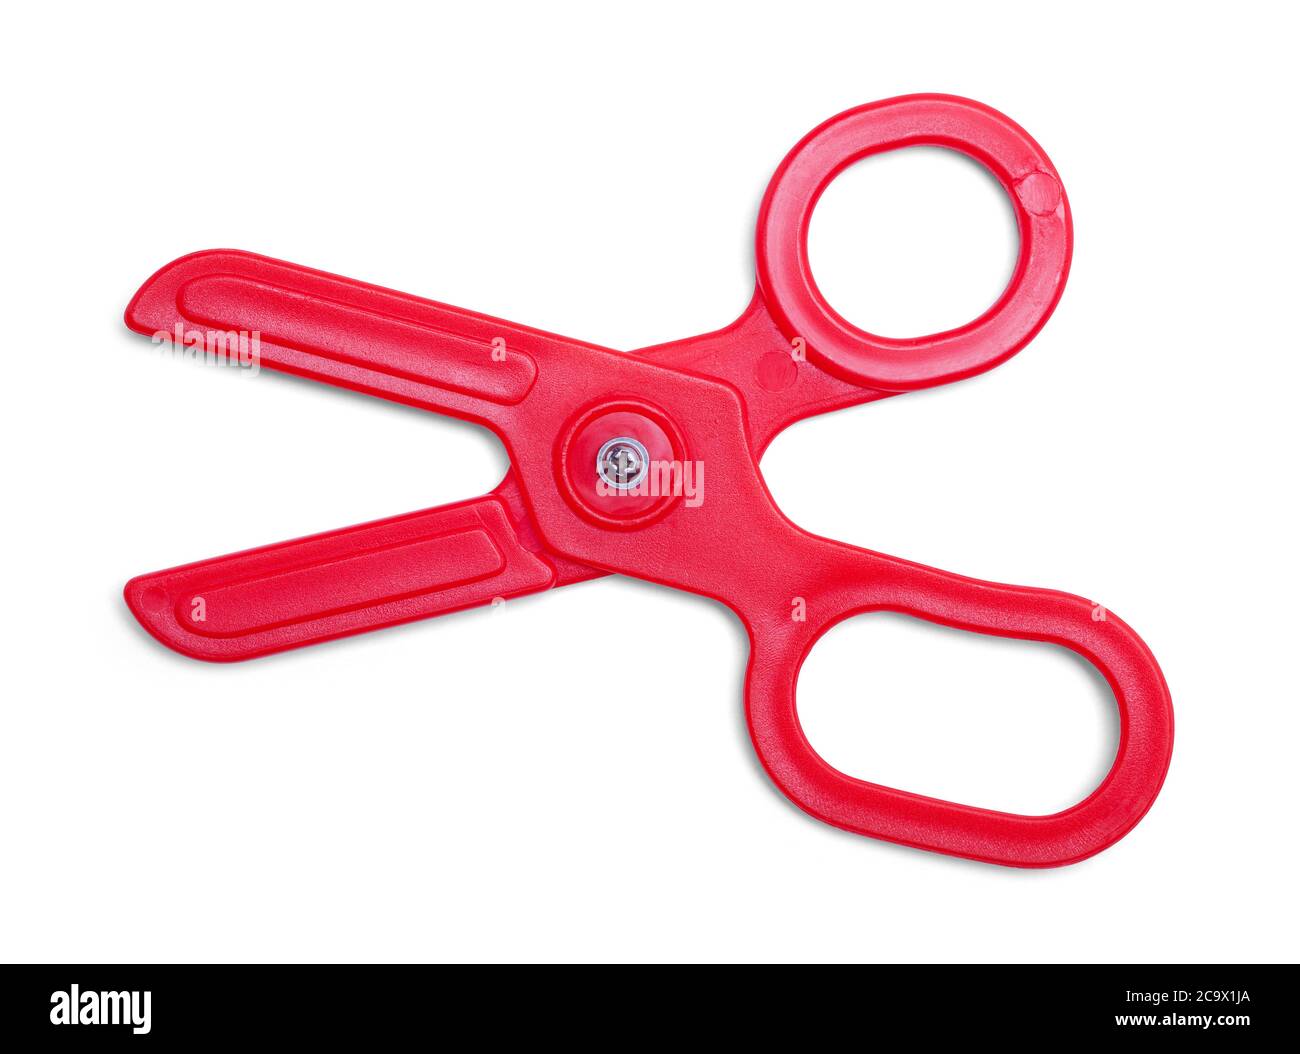 Red Plastic Toy Scissors Isolated on White. Stock Photo